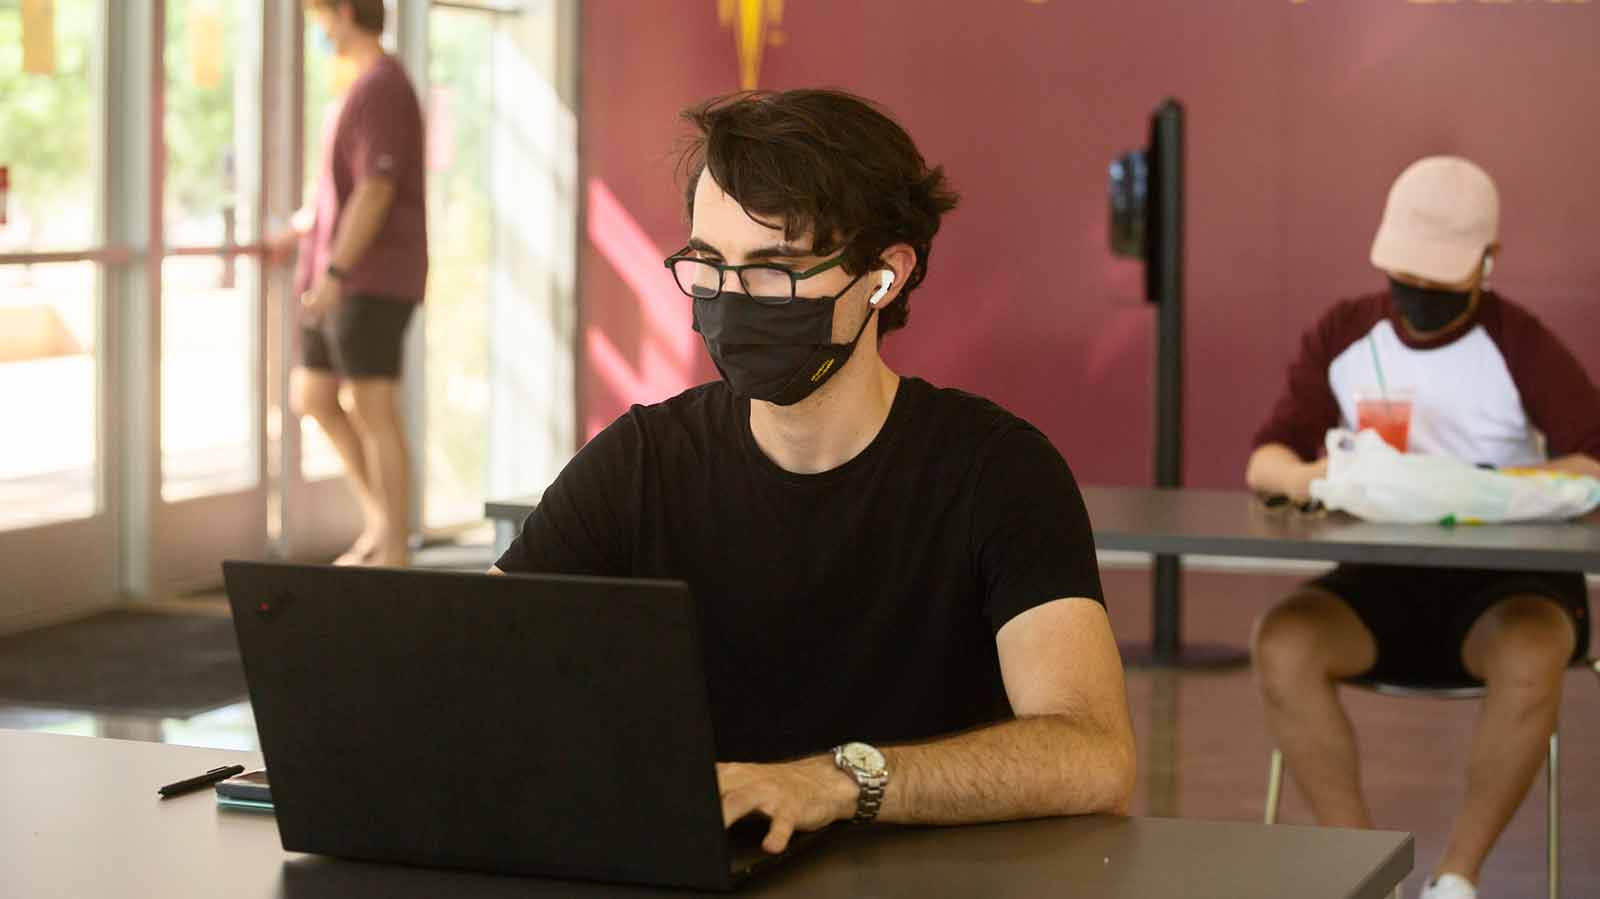 Male student wearing a mask while using a laptop.